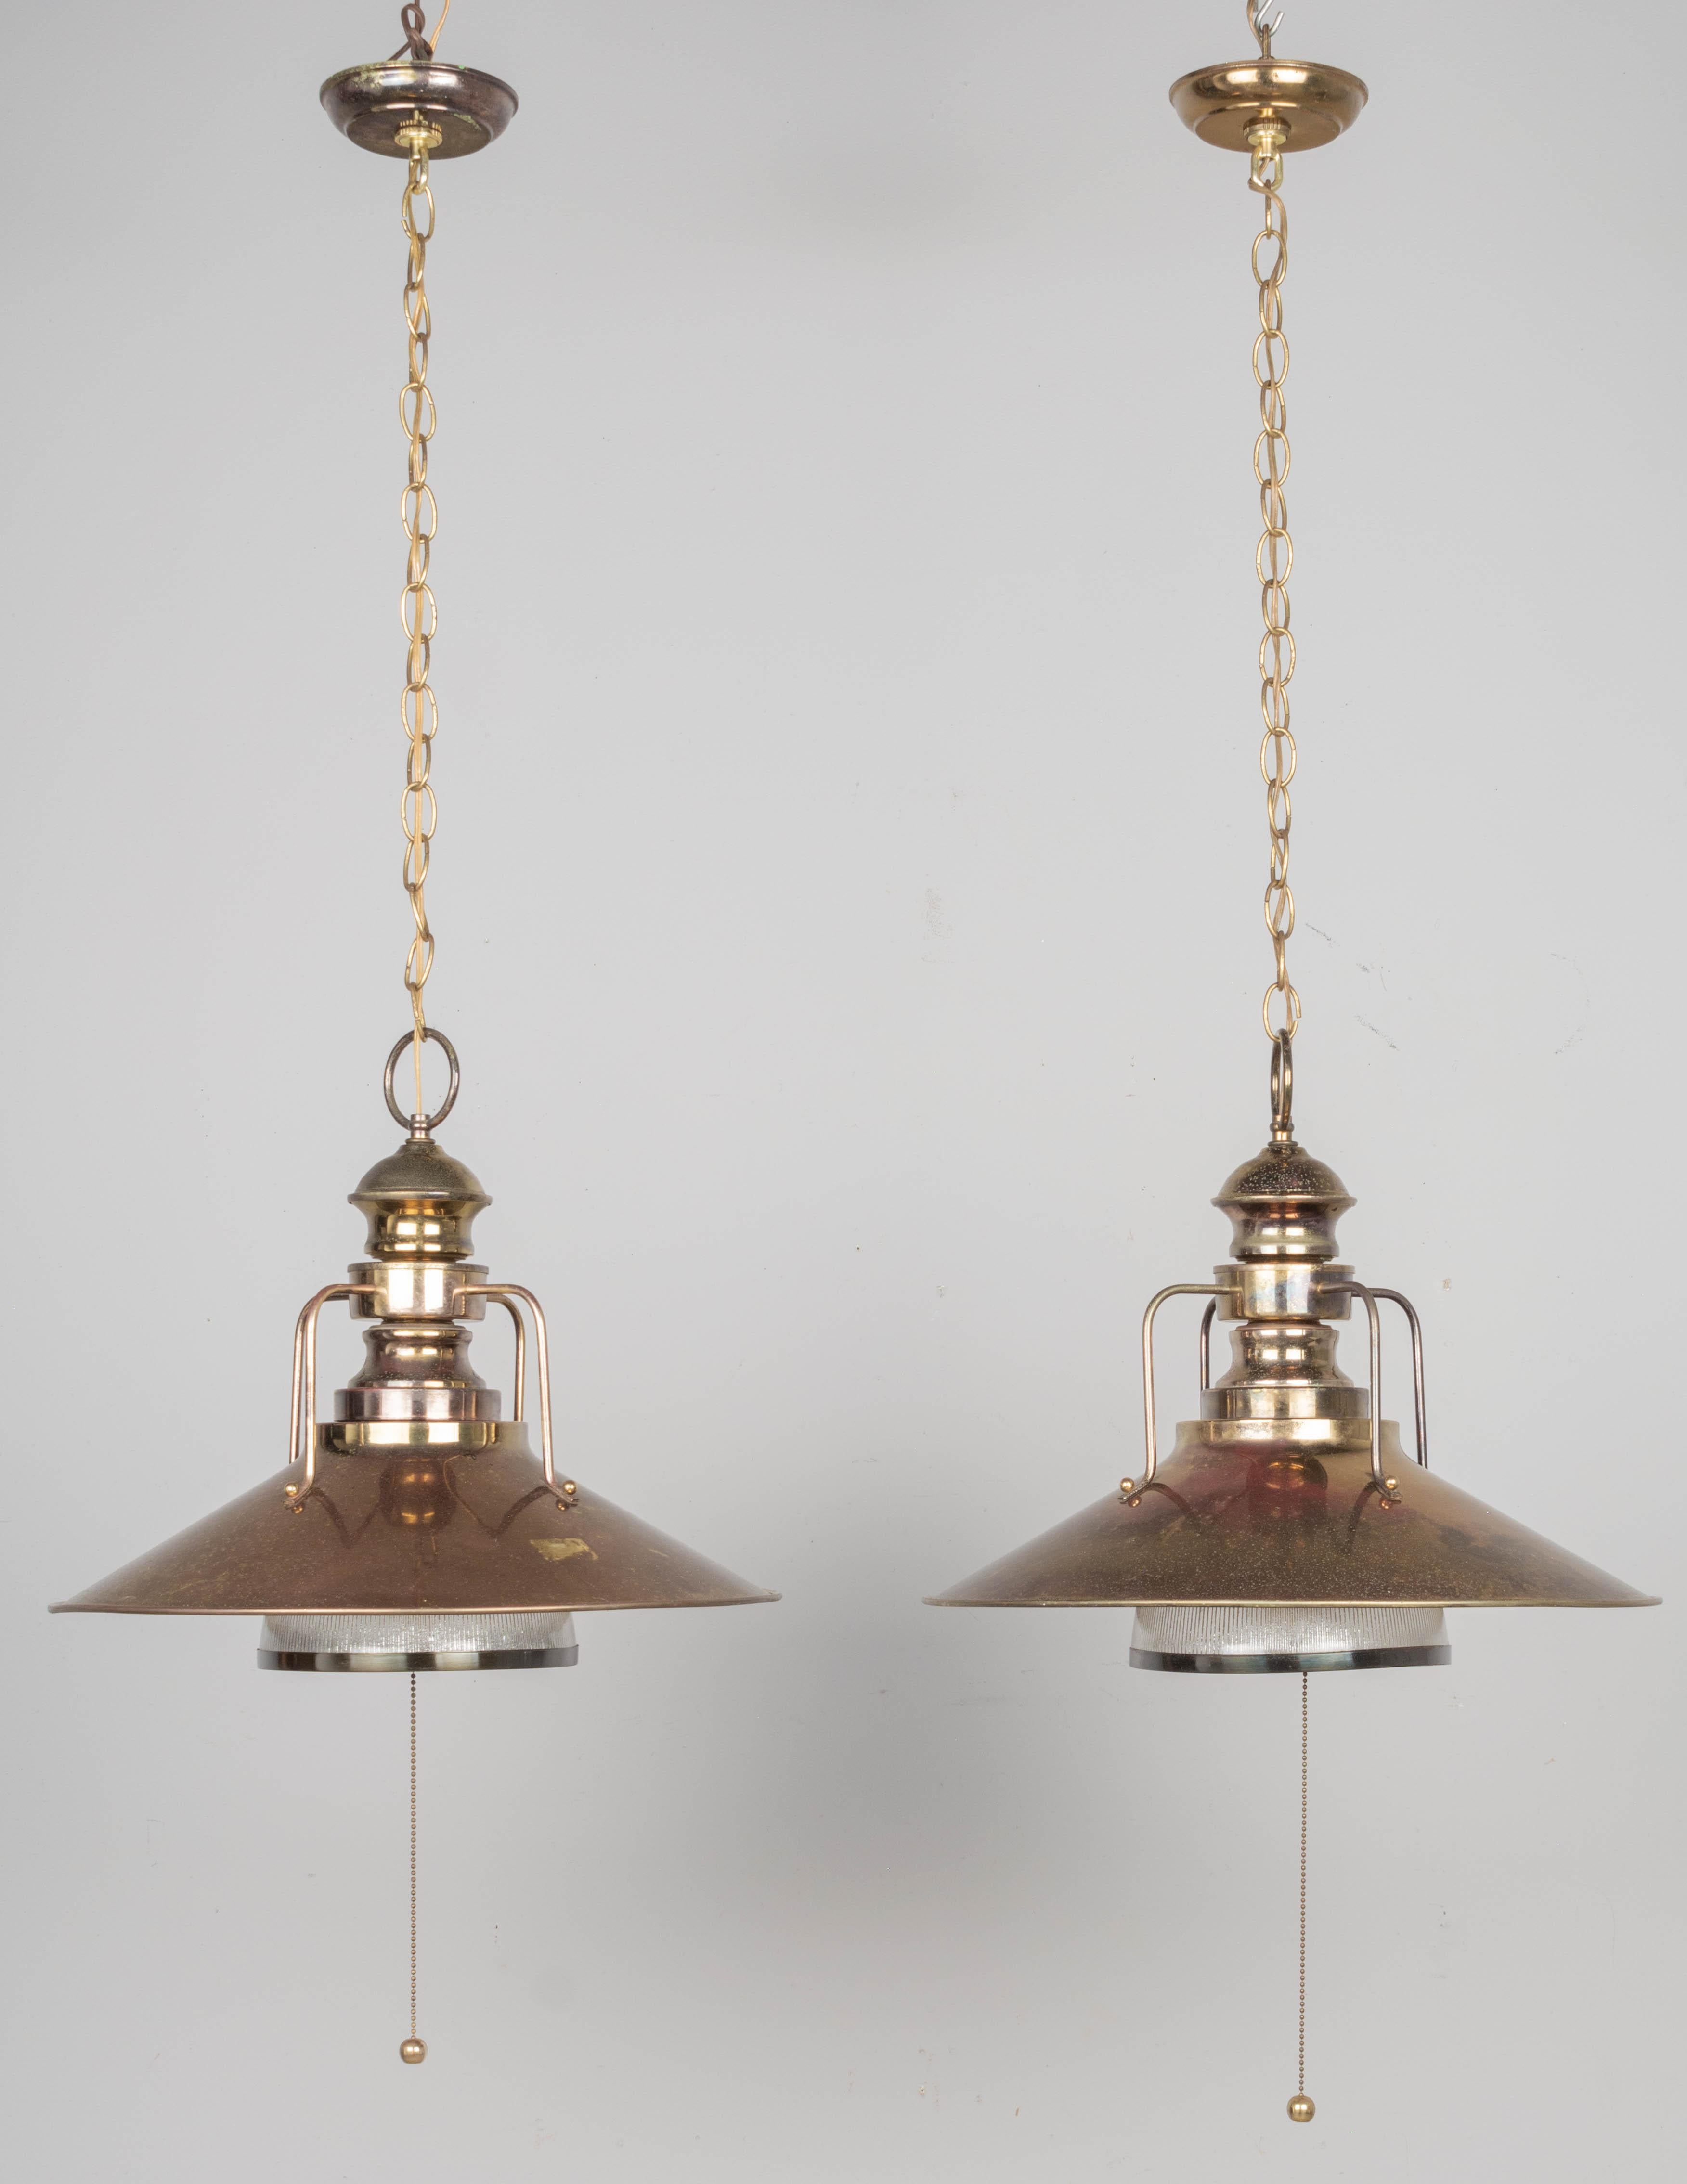 A pair of industrial railway station brass plated pendant lights with holophane glass reflector shades. Beautiful worn aged patina with warm color variegation and pitting. These lamps are in working condition and appear to have been rewired at some